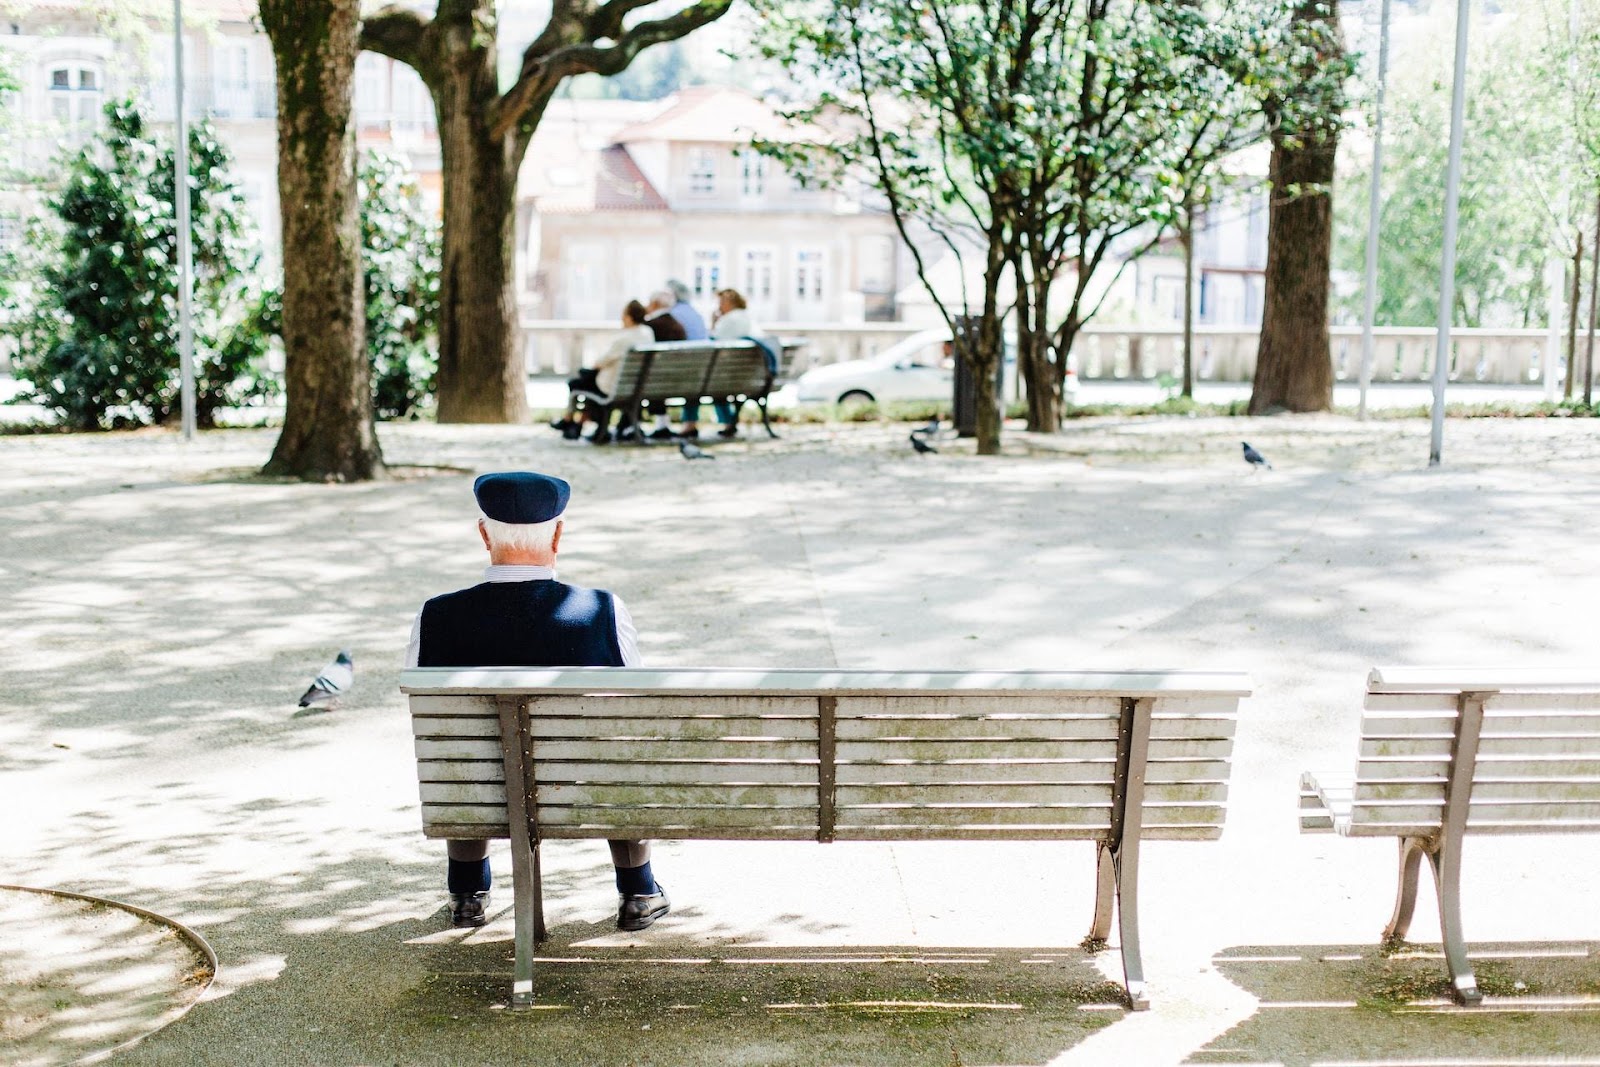 An elderly person sitting down on a bench